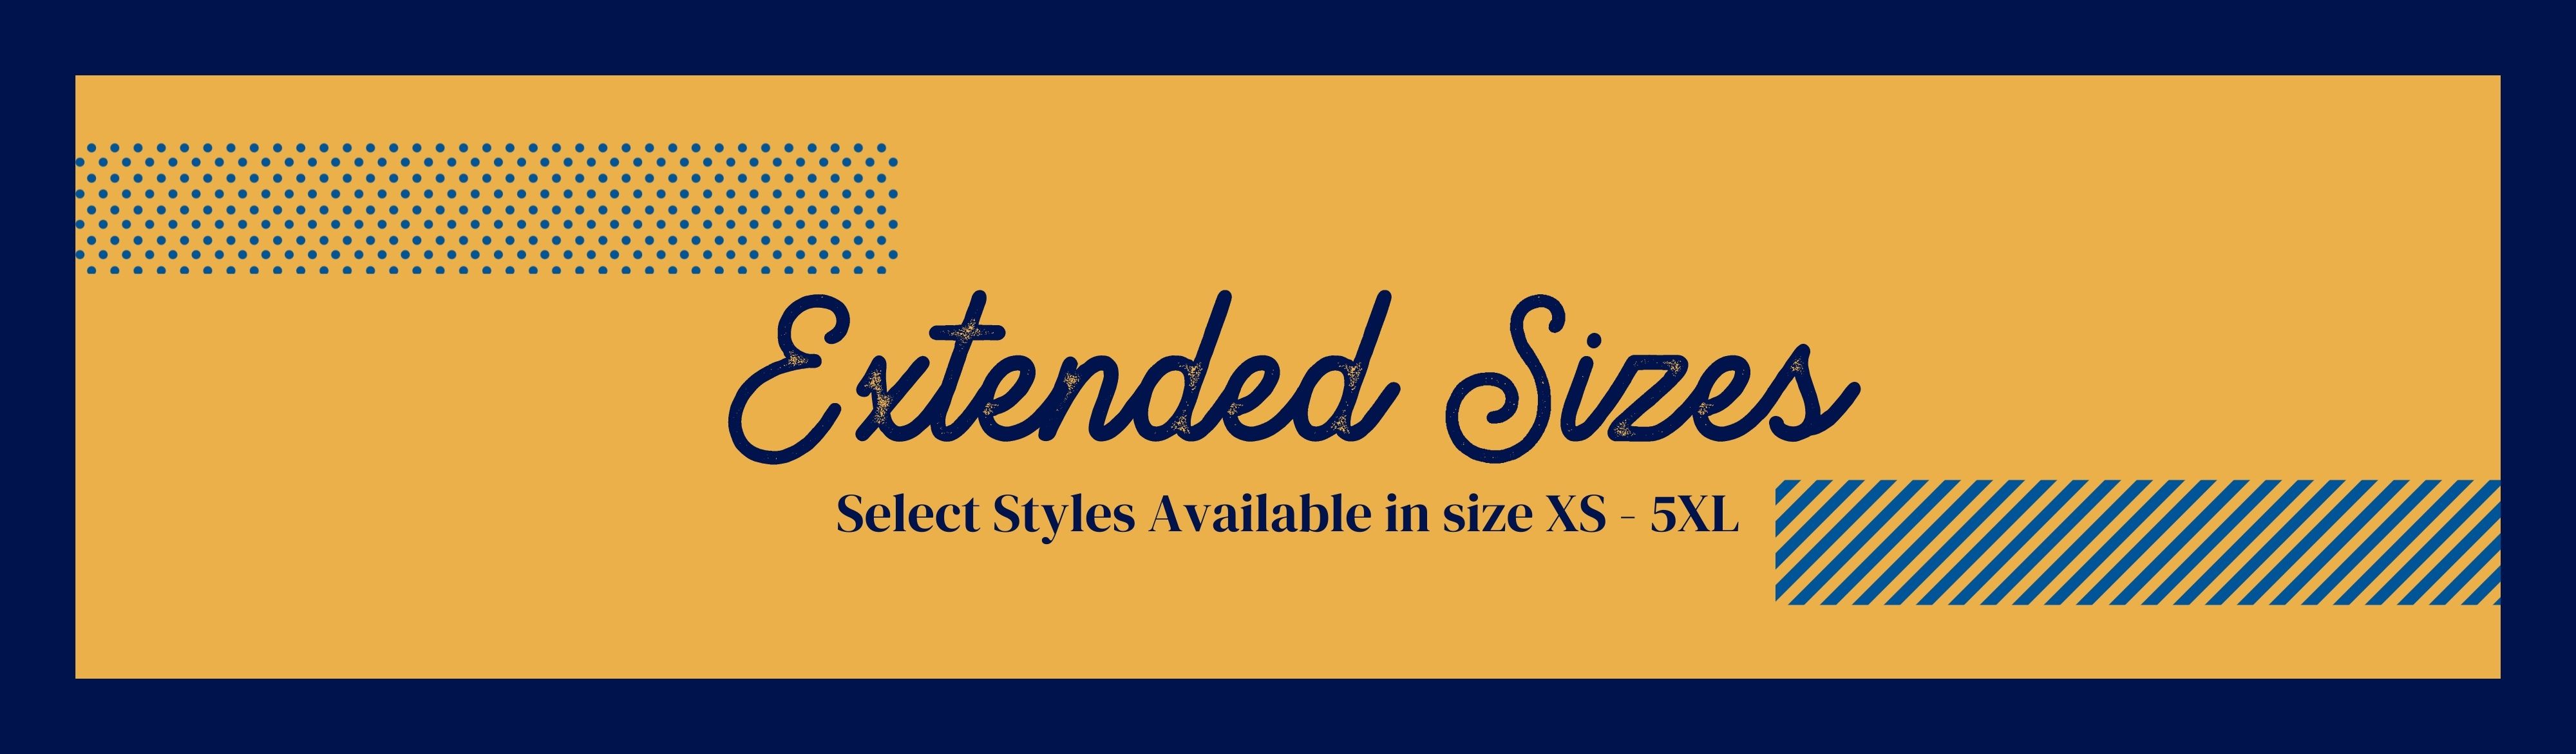 Extended Sizes